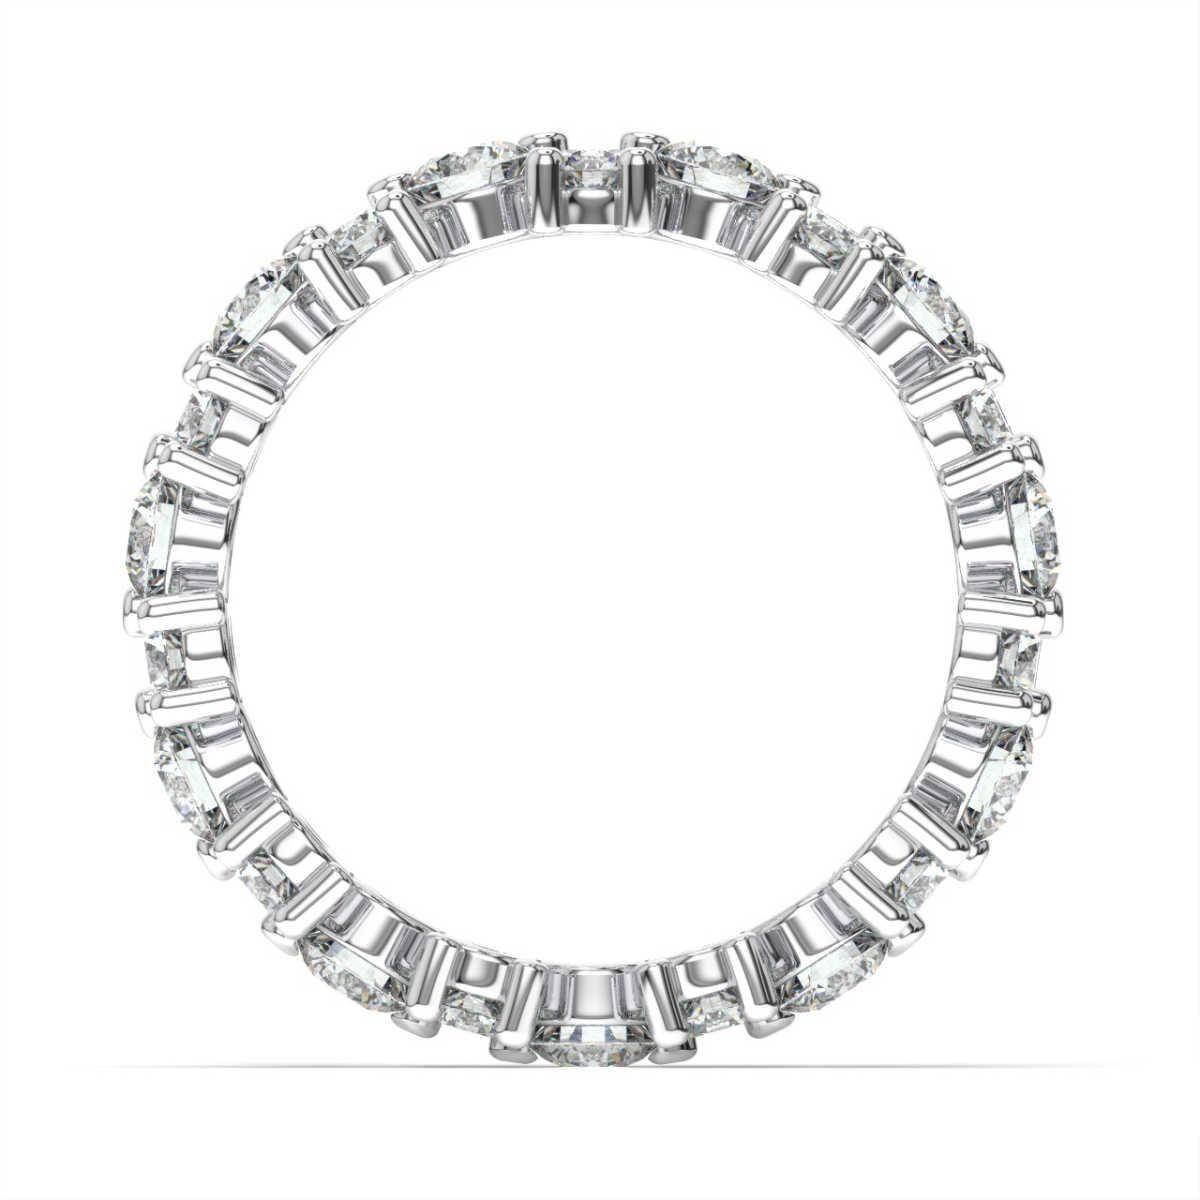 This eternity ring features a perfectly matched round brilliant diamonds set in a delicate prong. Experience the difference!

Product details: 

Center Gemstone Color: WHITE
Side Gemstone Type: NATURAL DIAMOND
Side Gemstone Shape: ROUND
Metal: 18K